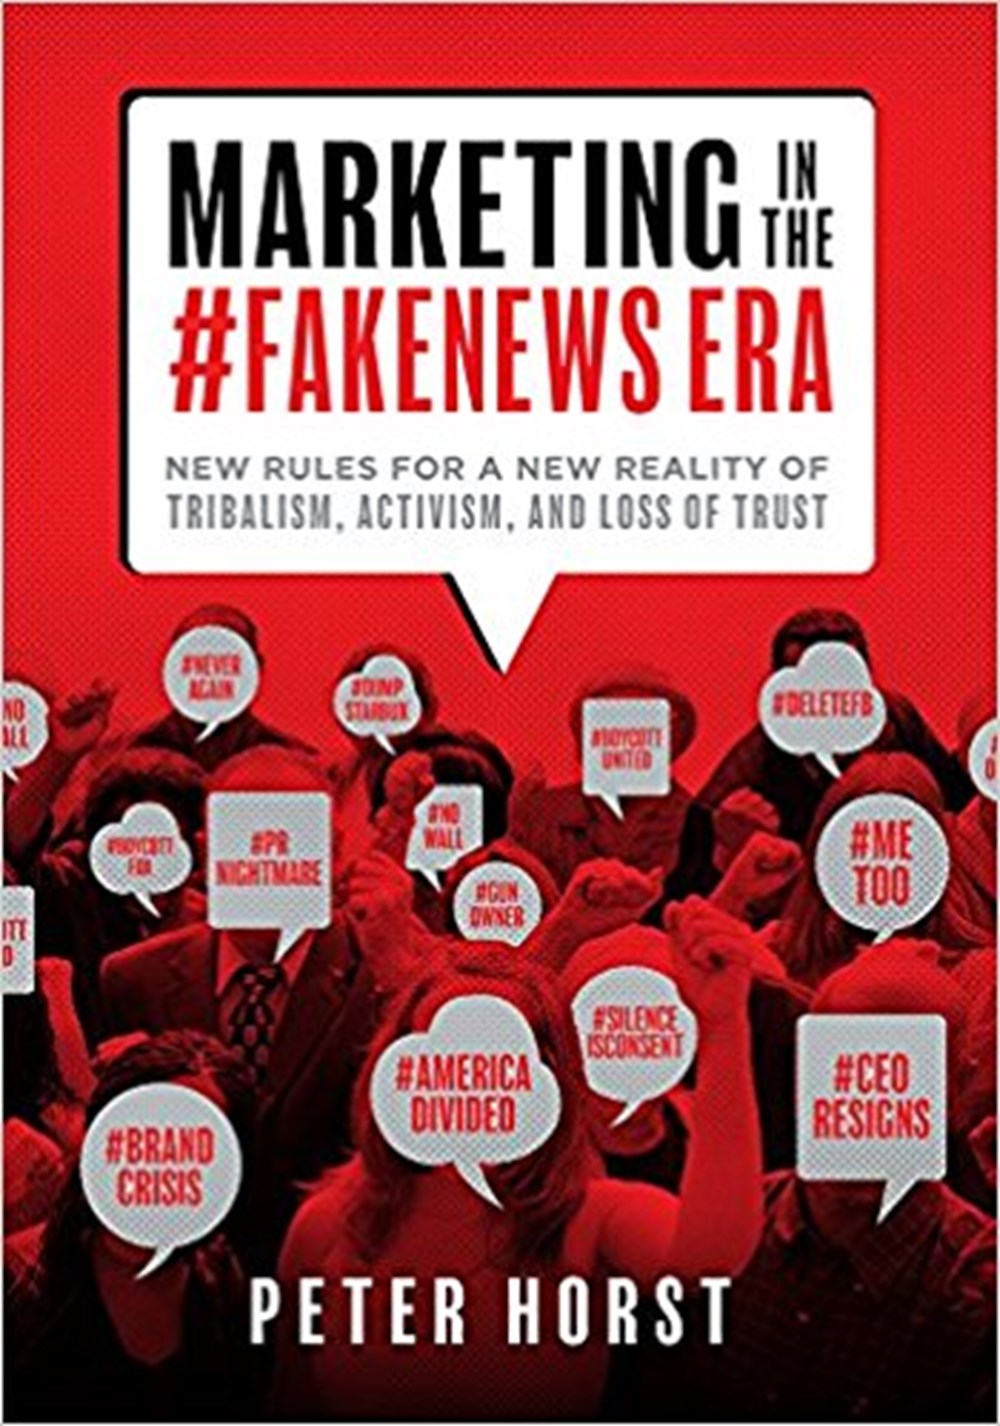 Marketing in the #Fakenews Era: New Rules for a New Reality of Tribalism, Activism, and Loss of Trus